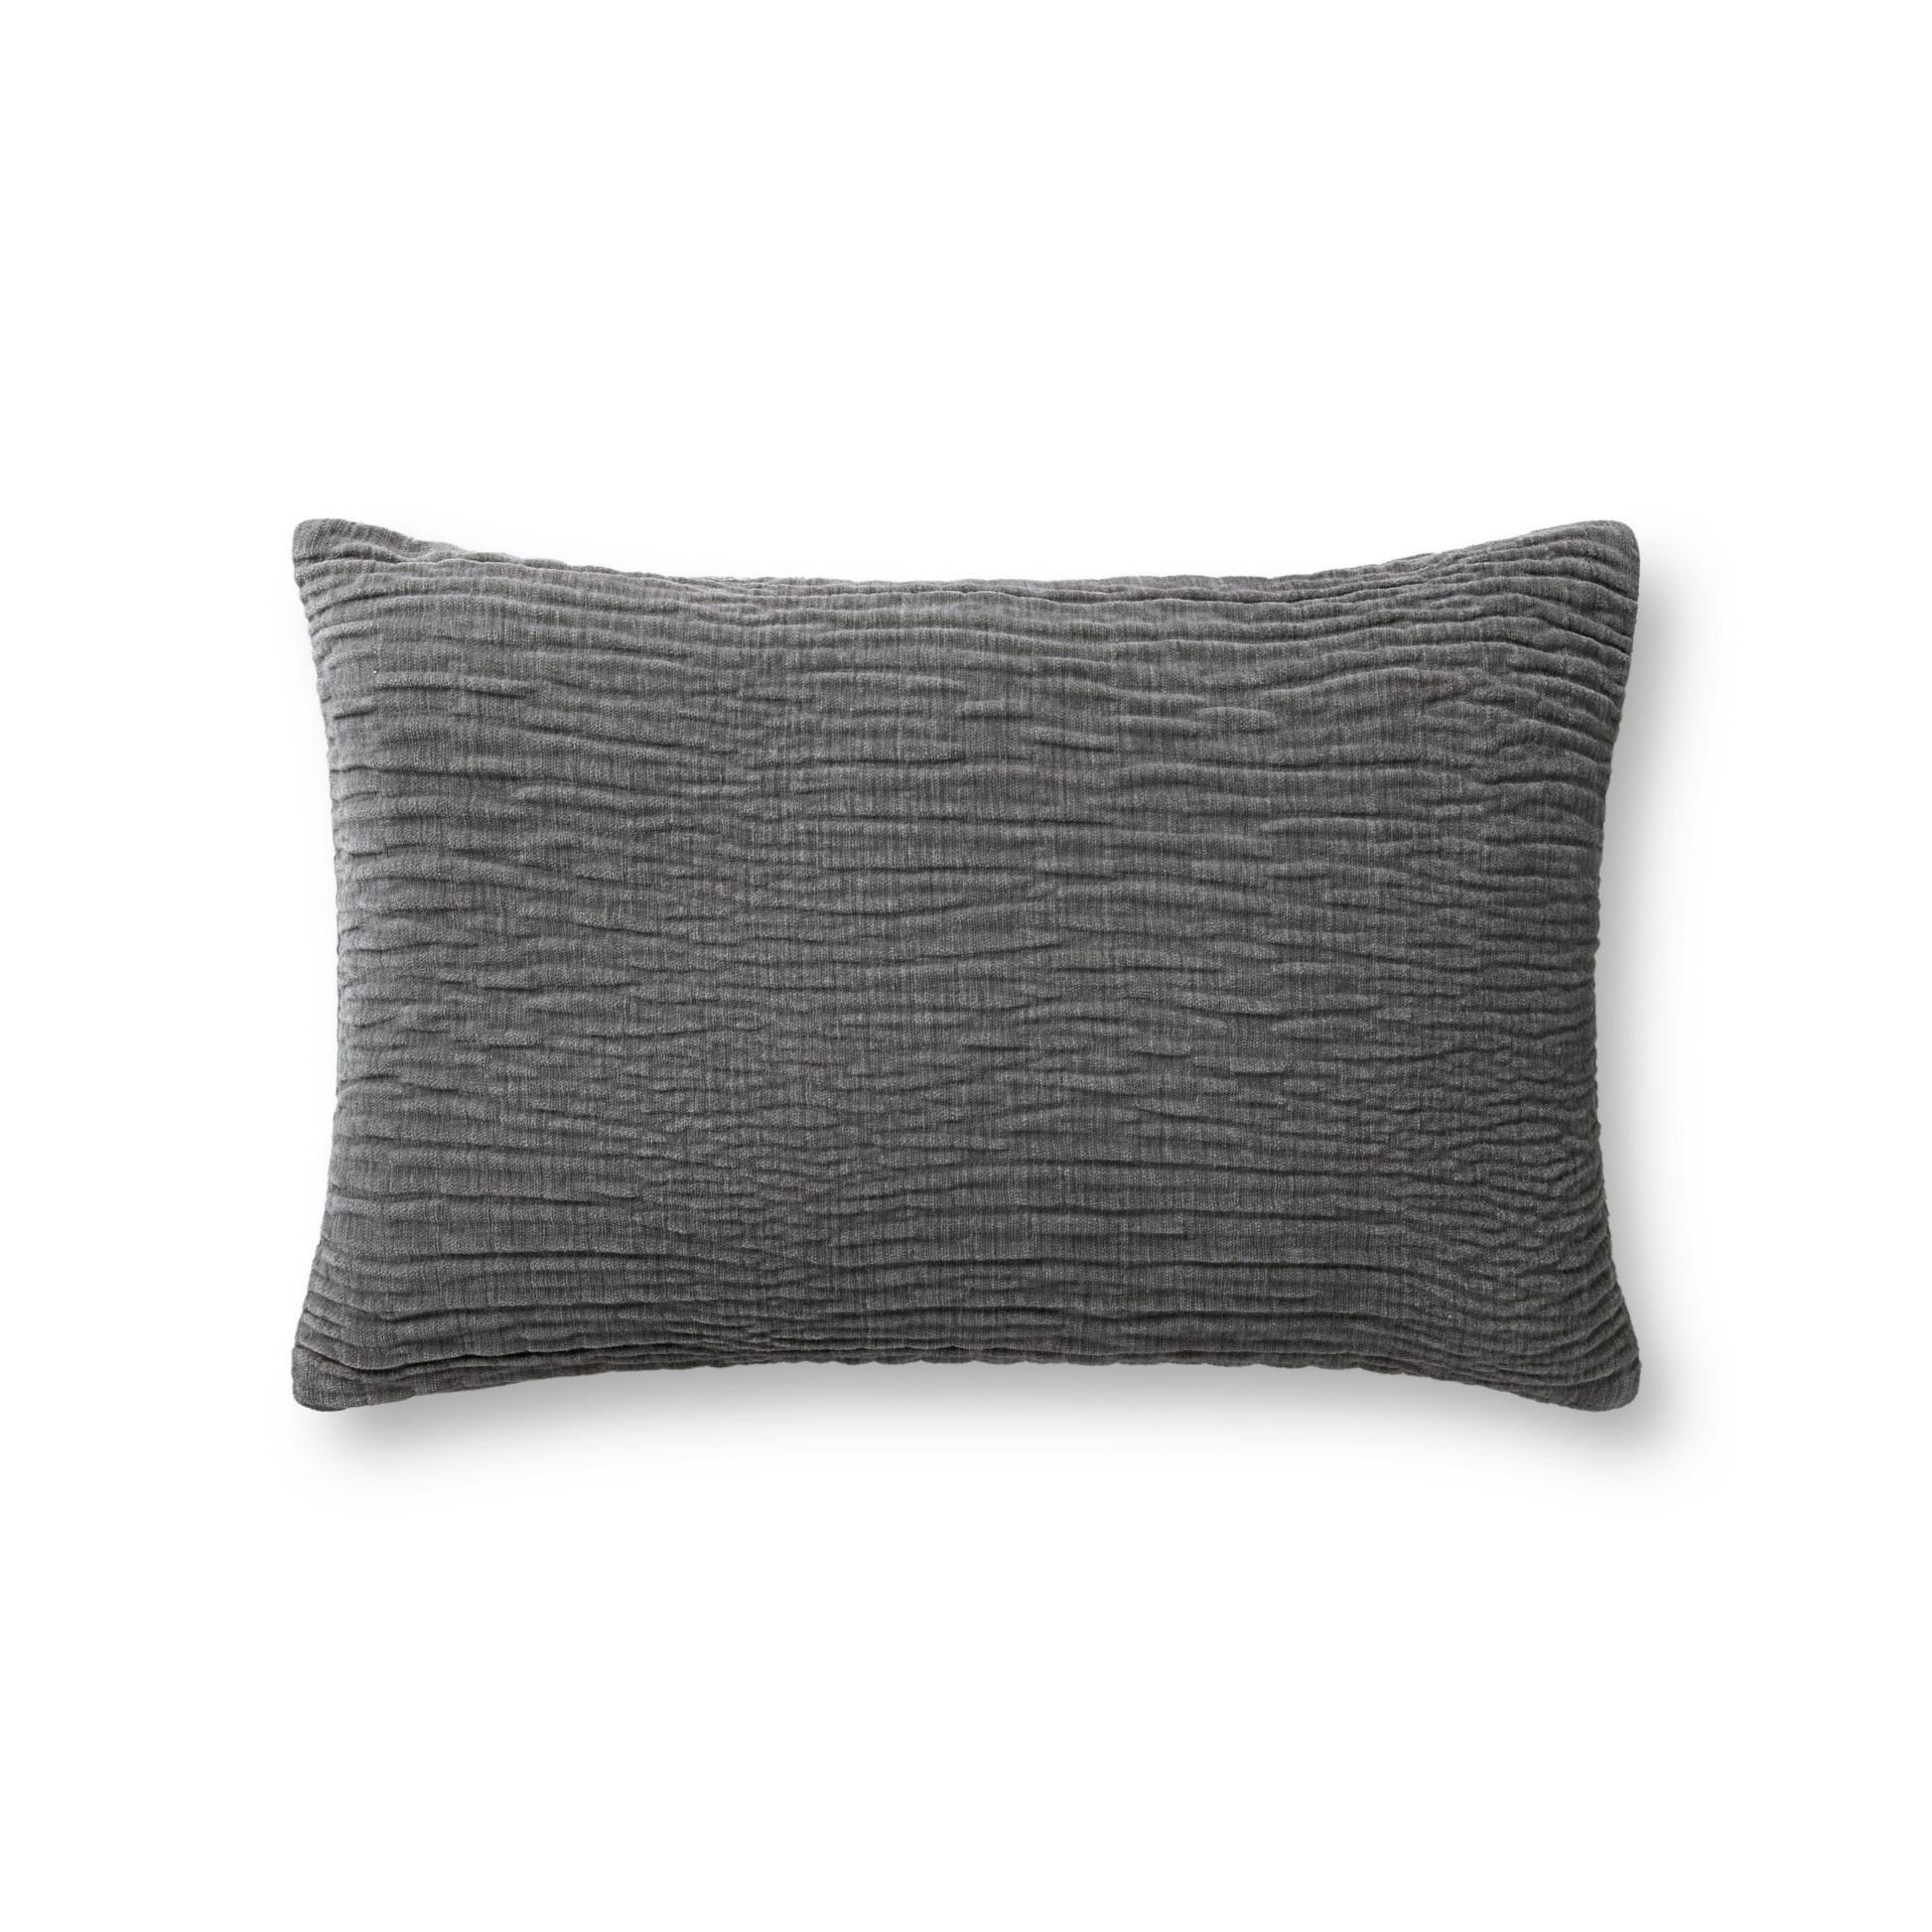 Photo of a pillow;  Grey 16'' x 26'' Cover w/Poly Pillow